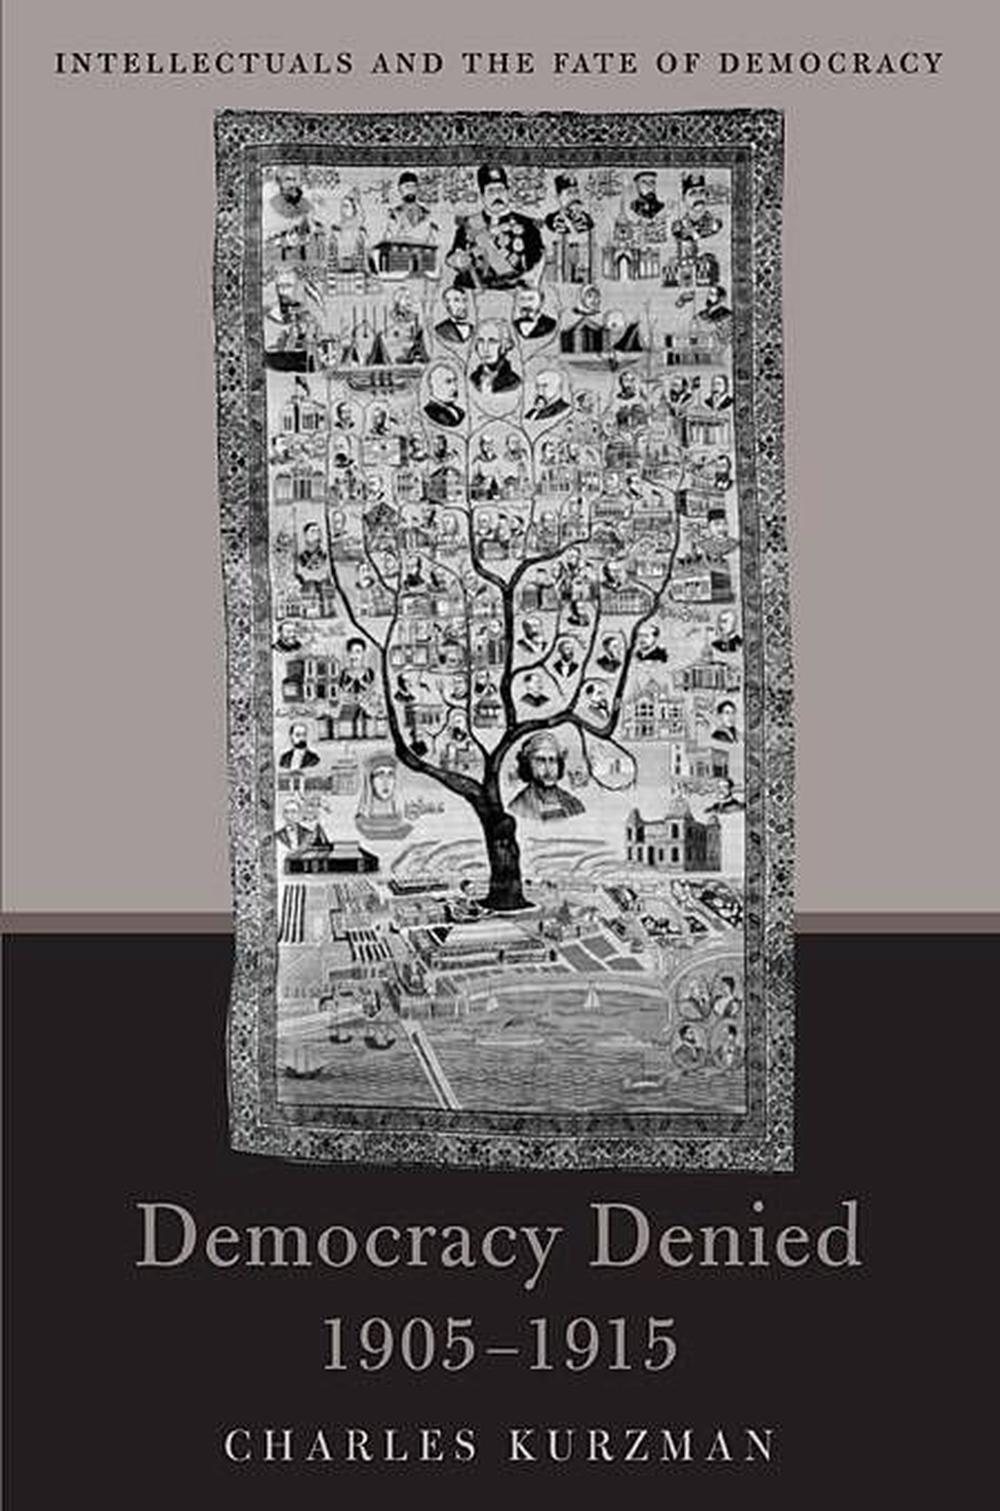 Democracy Denied, 19051915 Intellectuals and the Fate of Democracy by